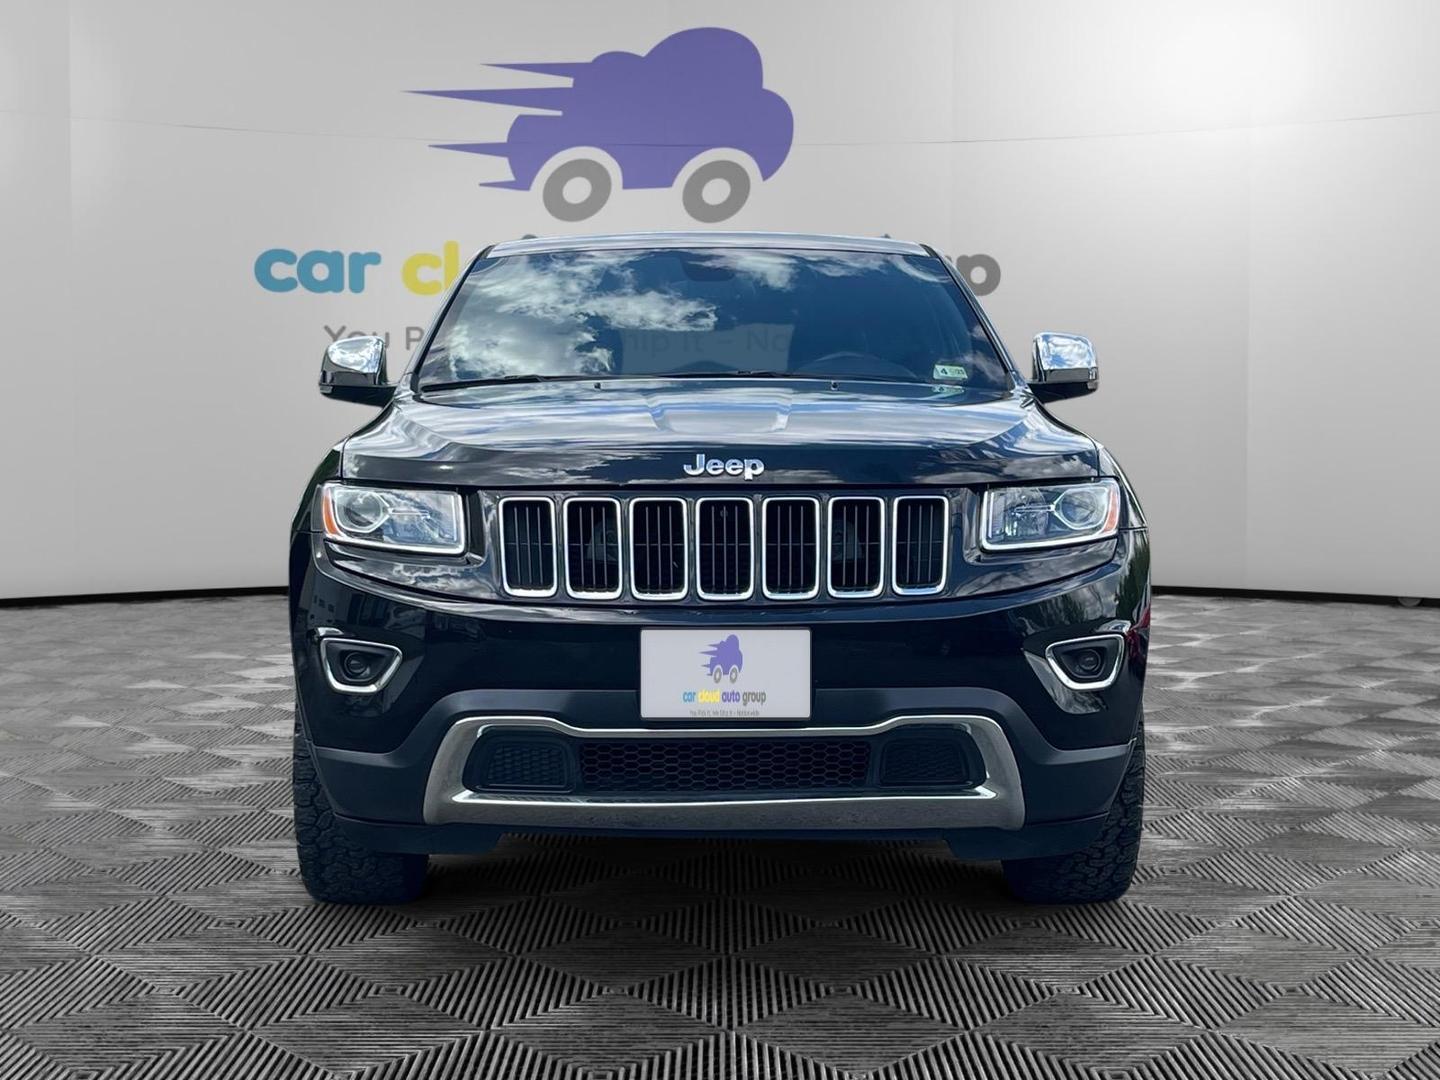 2015 Jeep Grand Cherokee Utility 4d Limited 4wd 3.0l V6 T-diesel - Image 8